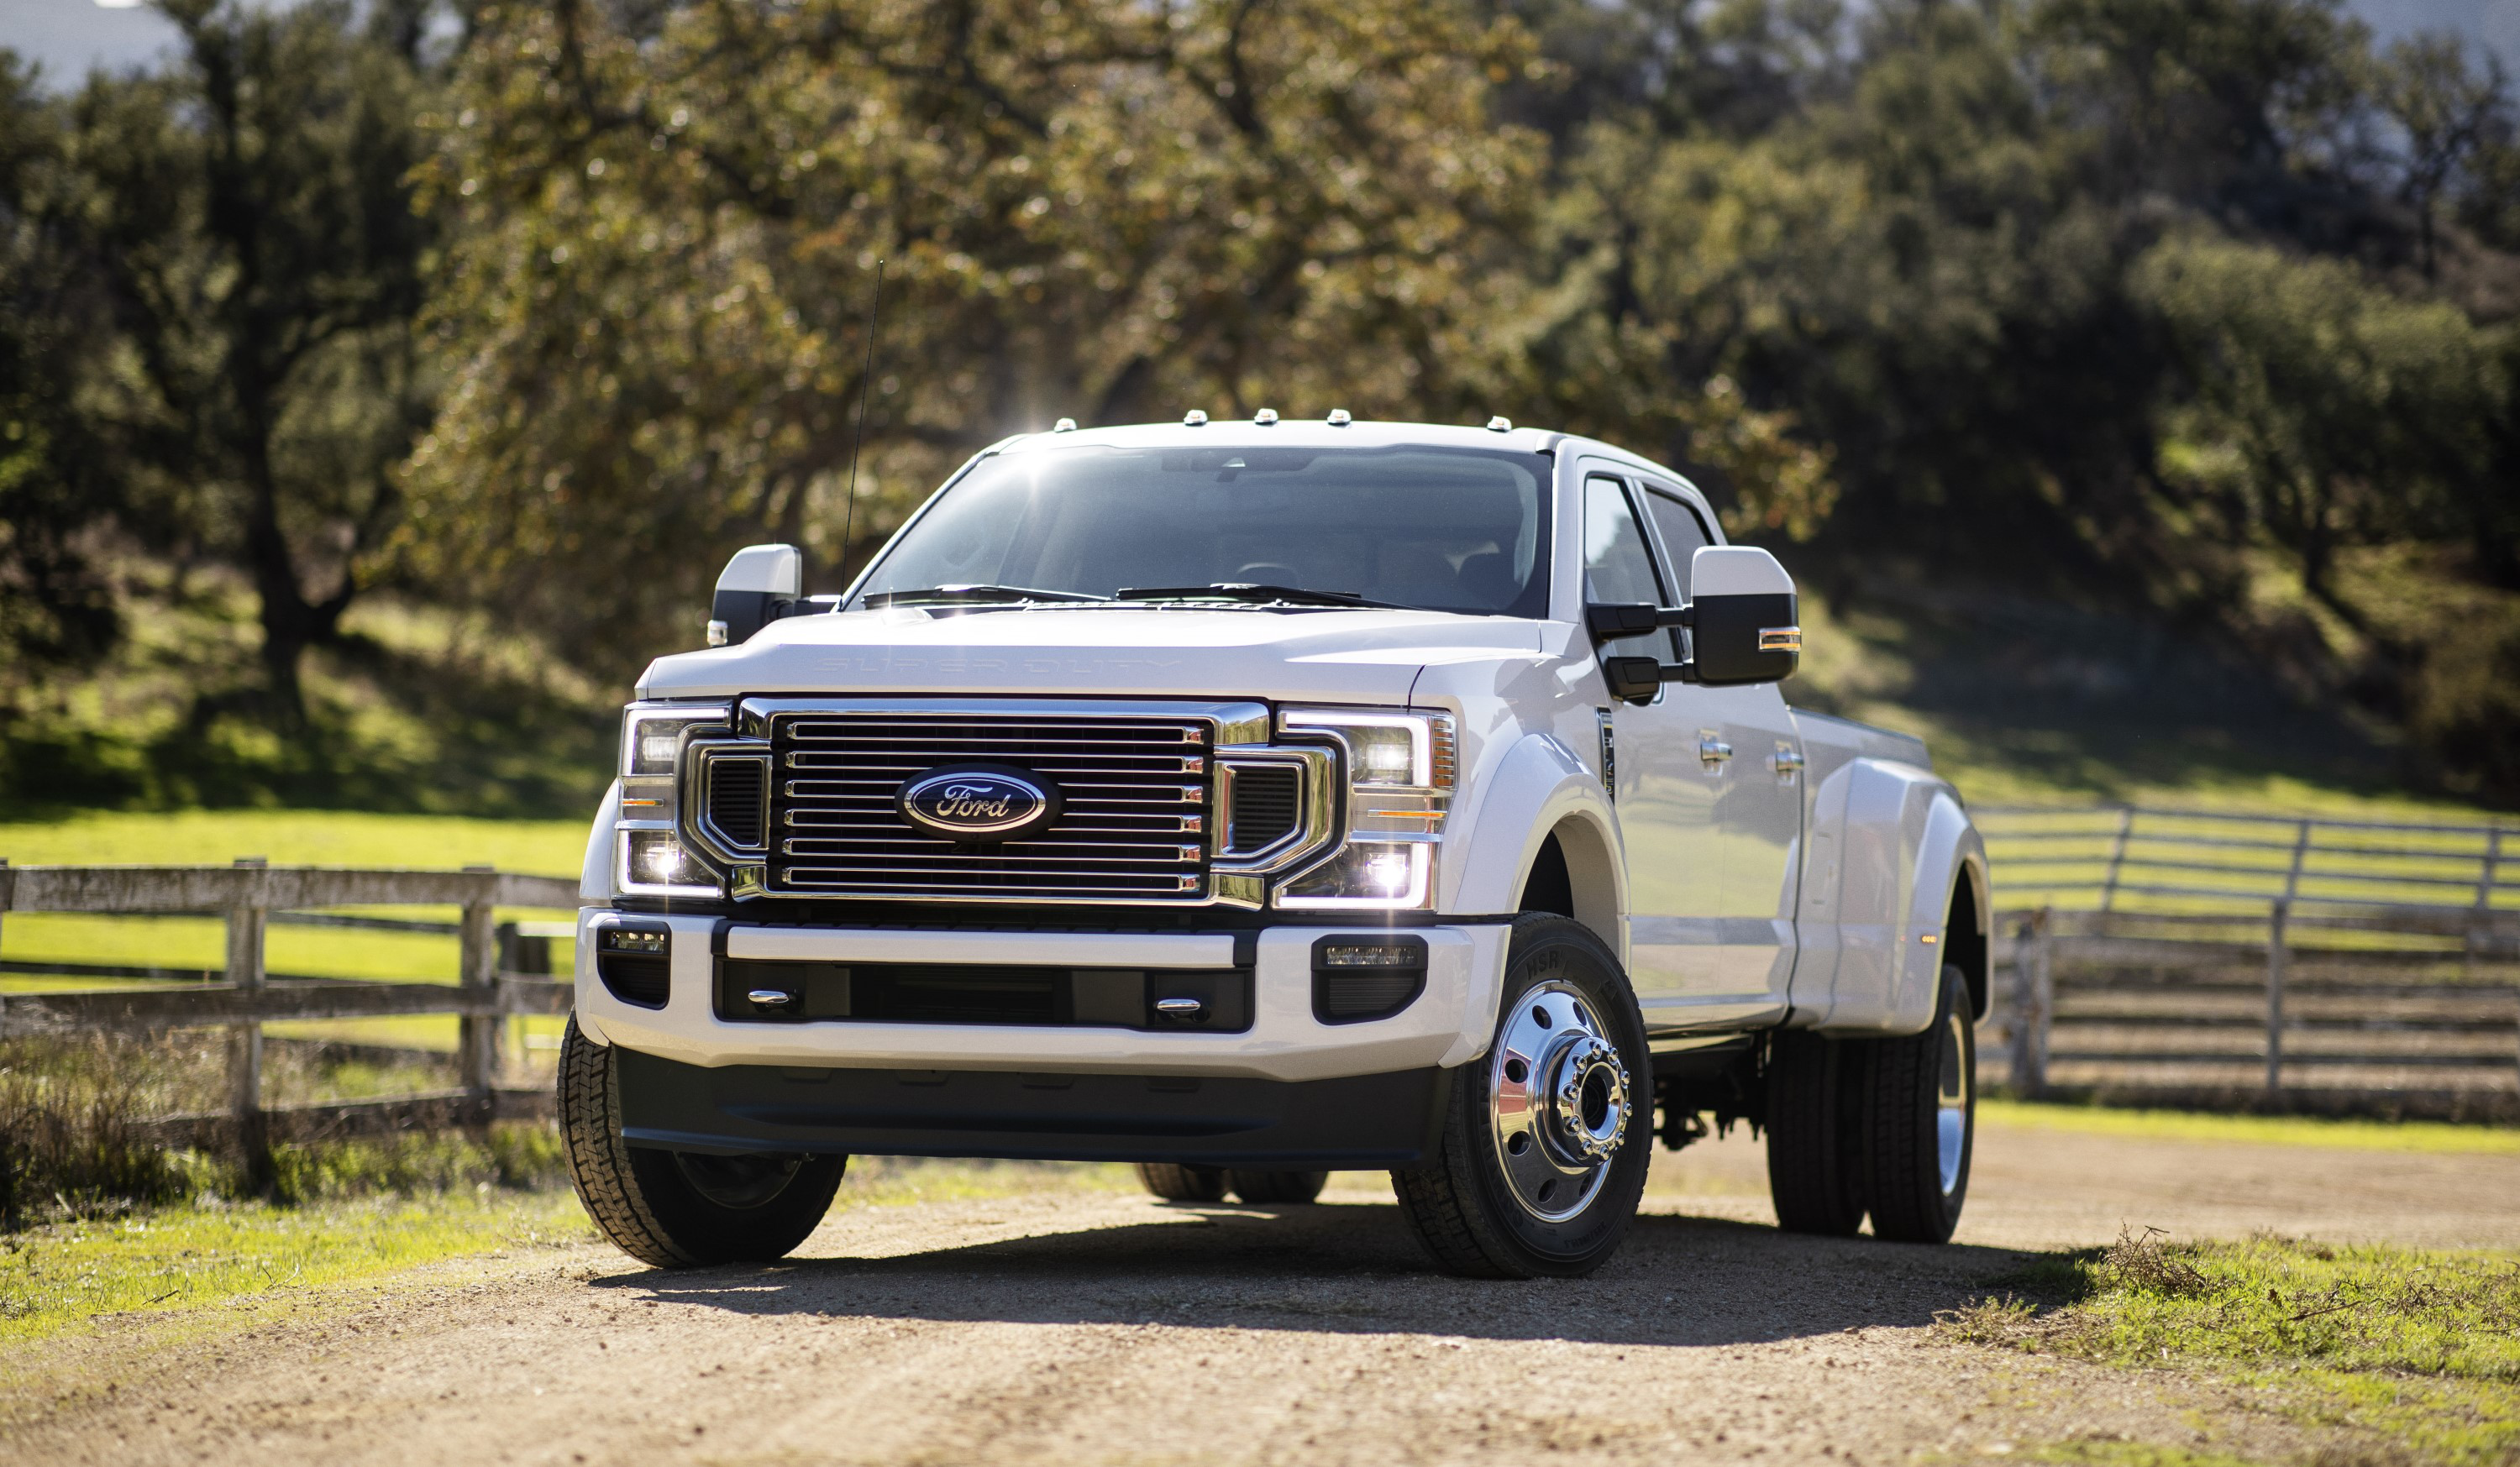 Ford Introduces New Super Duty Trucks With Gas V8 Option